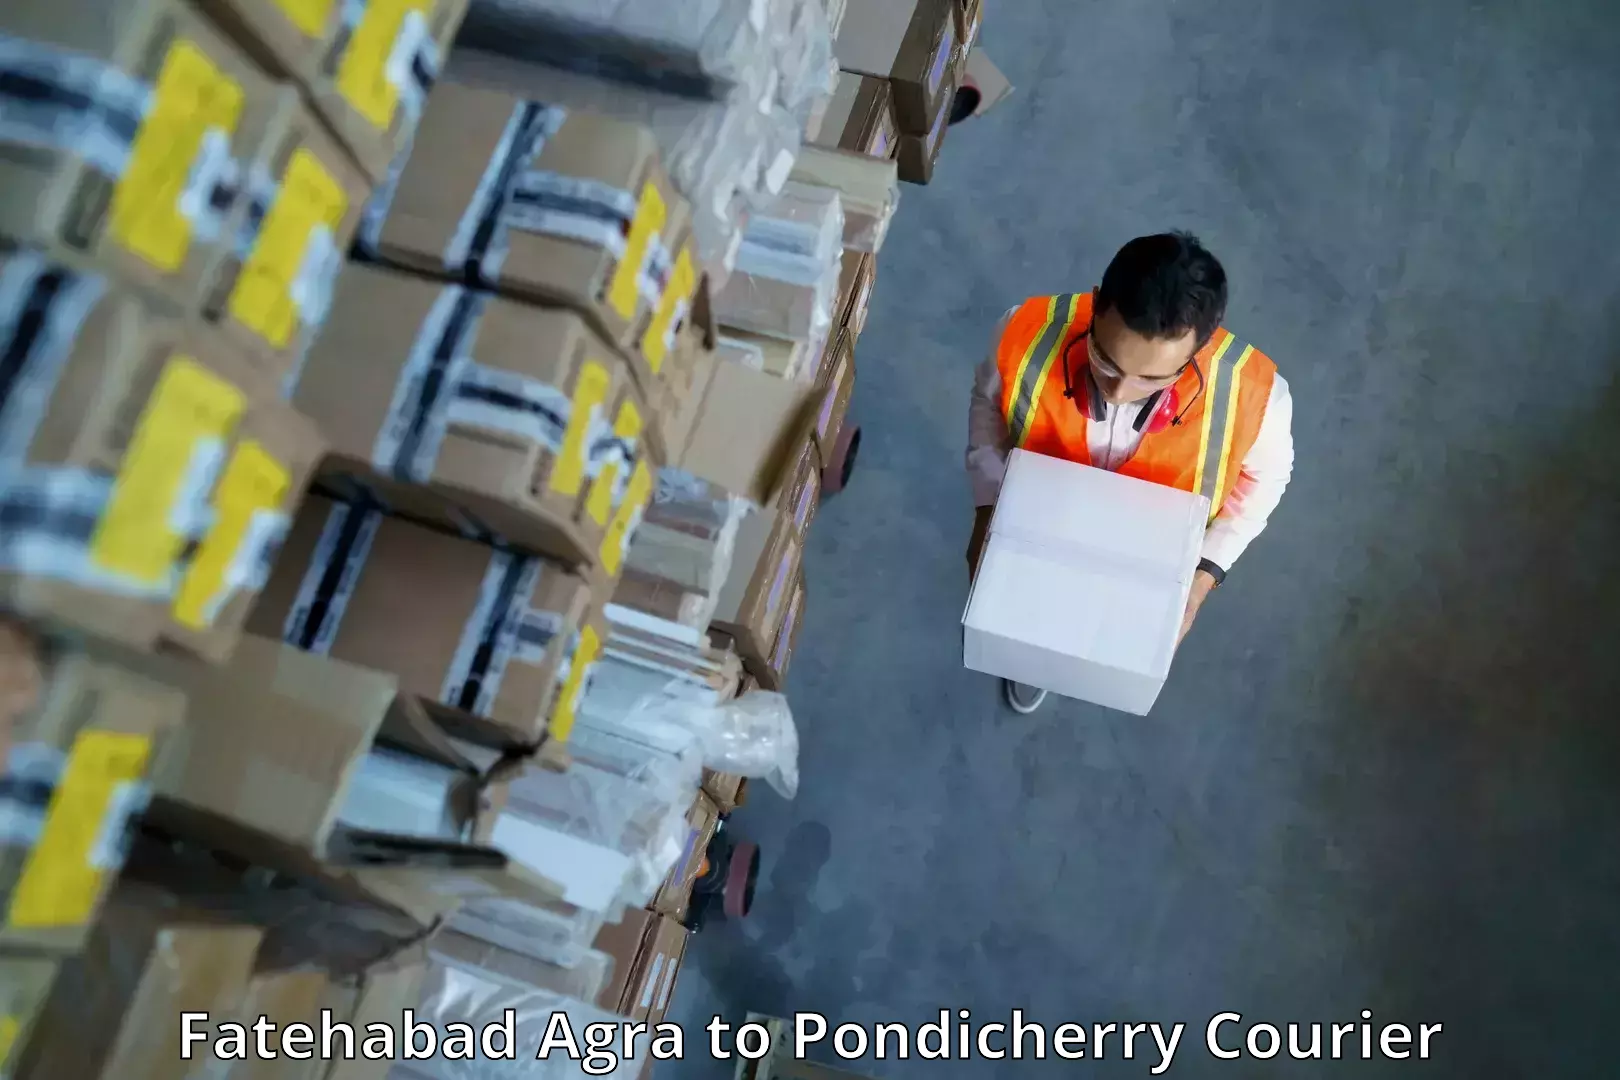 24/7 shipping services Fatehabad Agra to Pondicherry